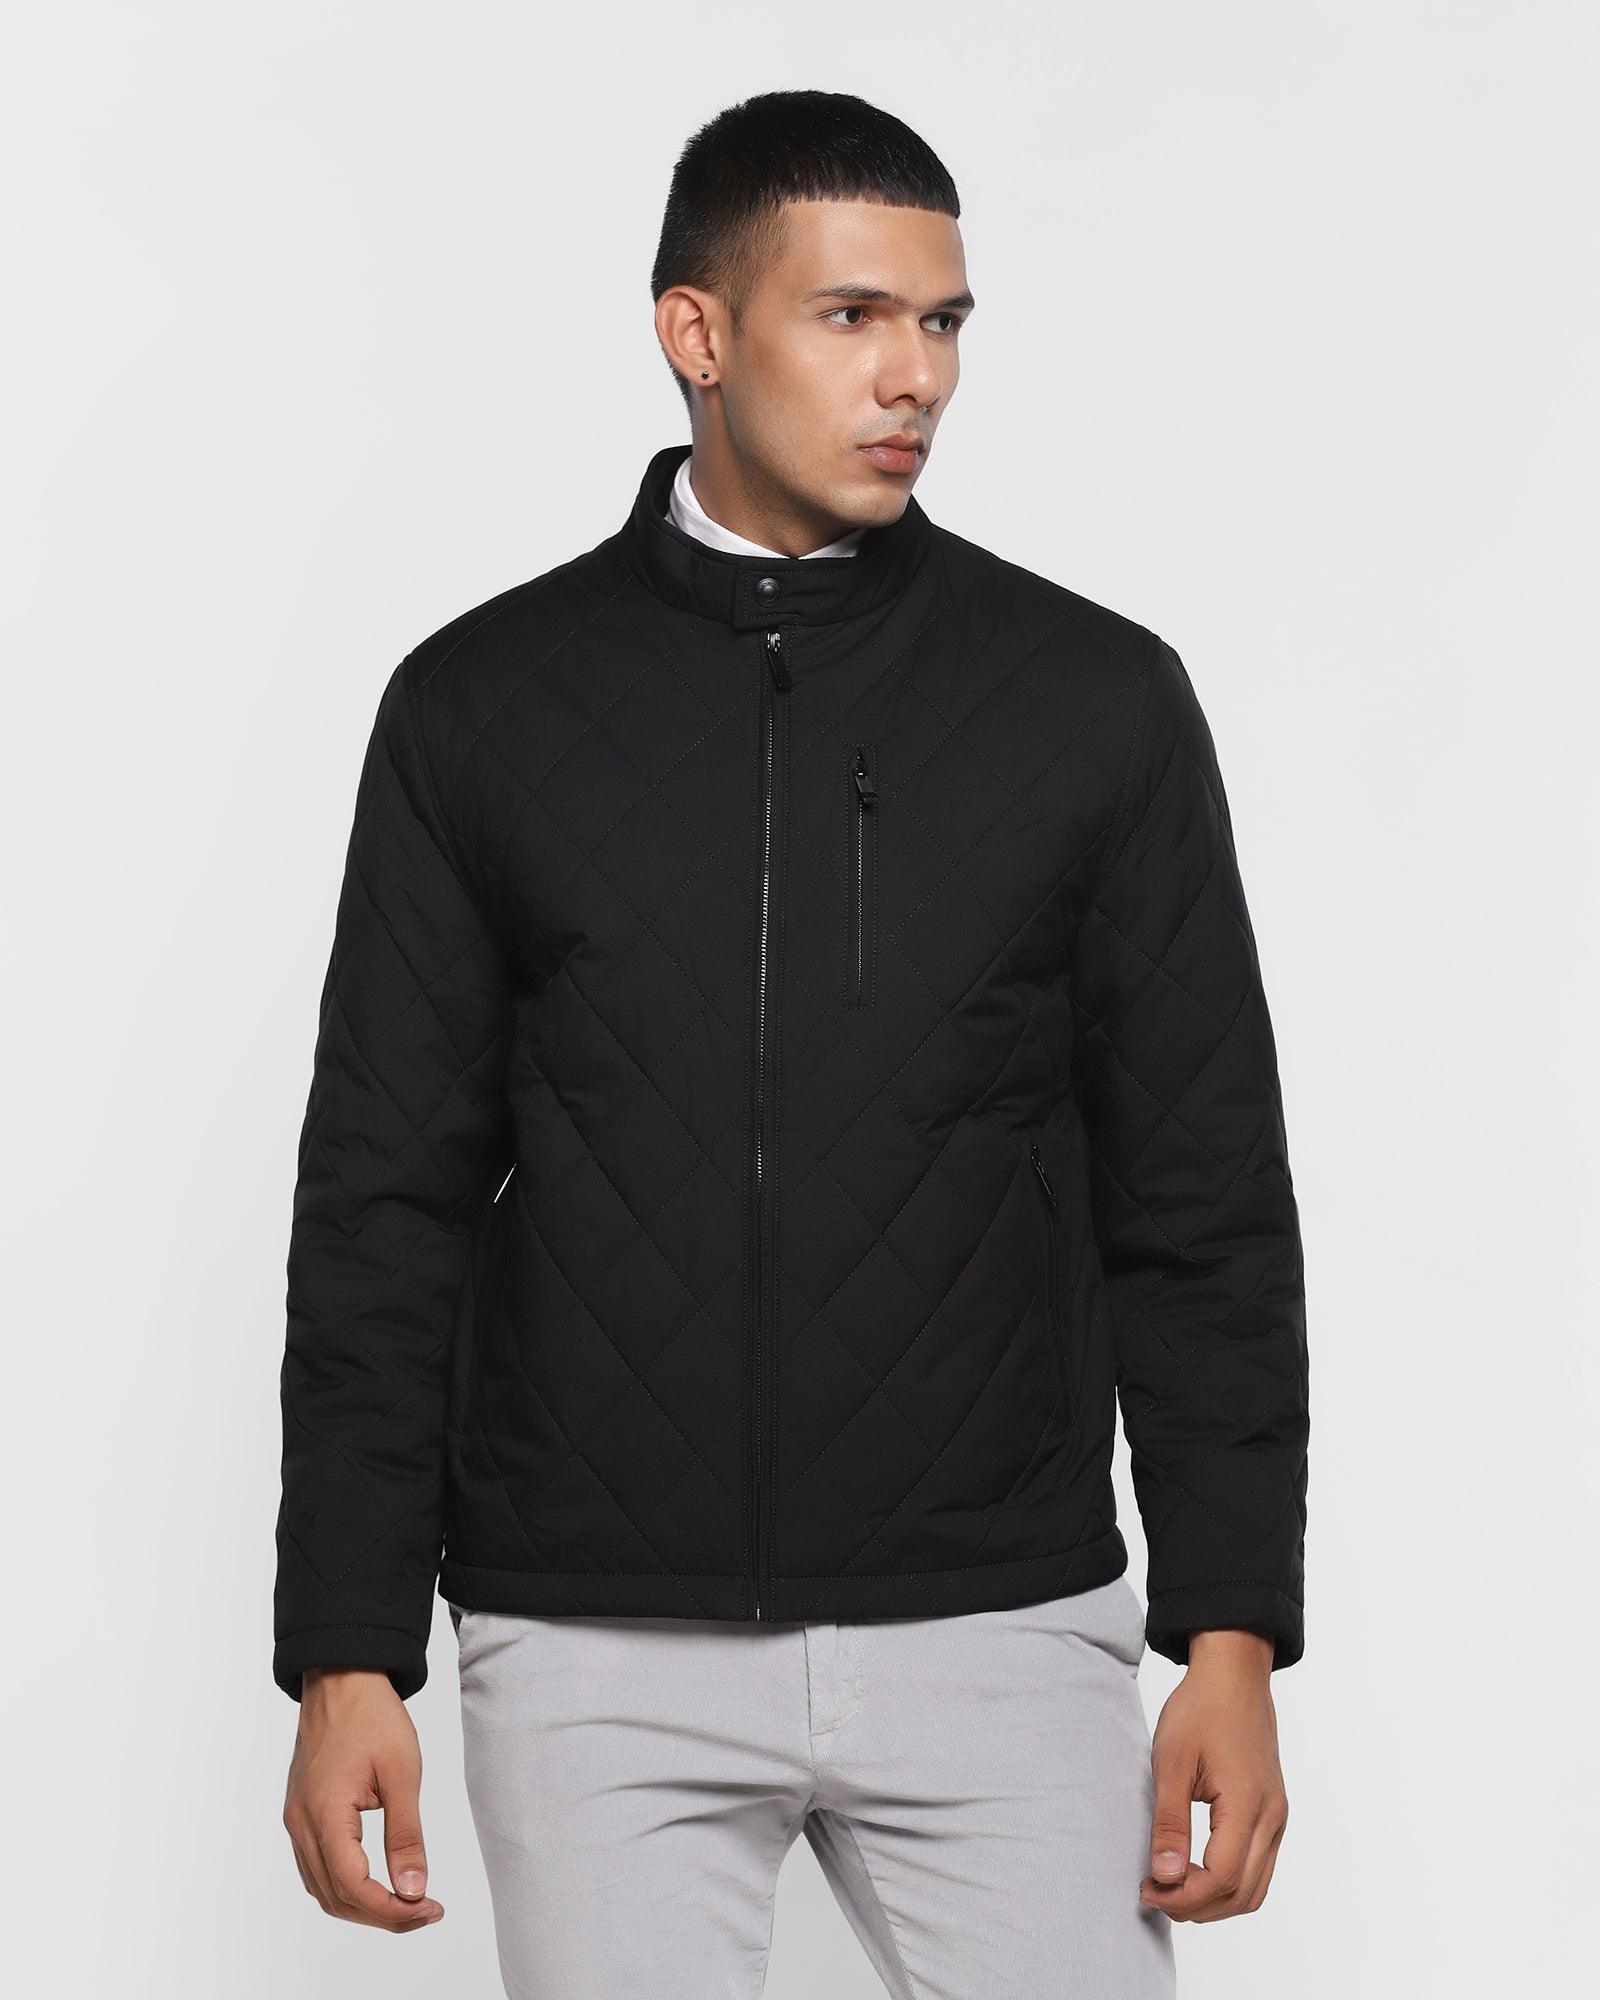 Quilted Black Solid Zipper Jacket - Hiver